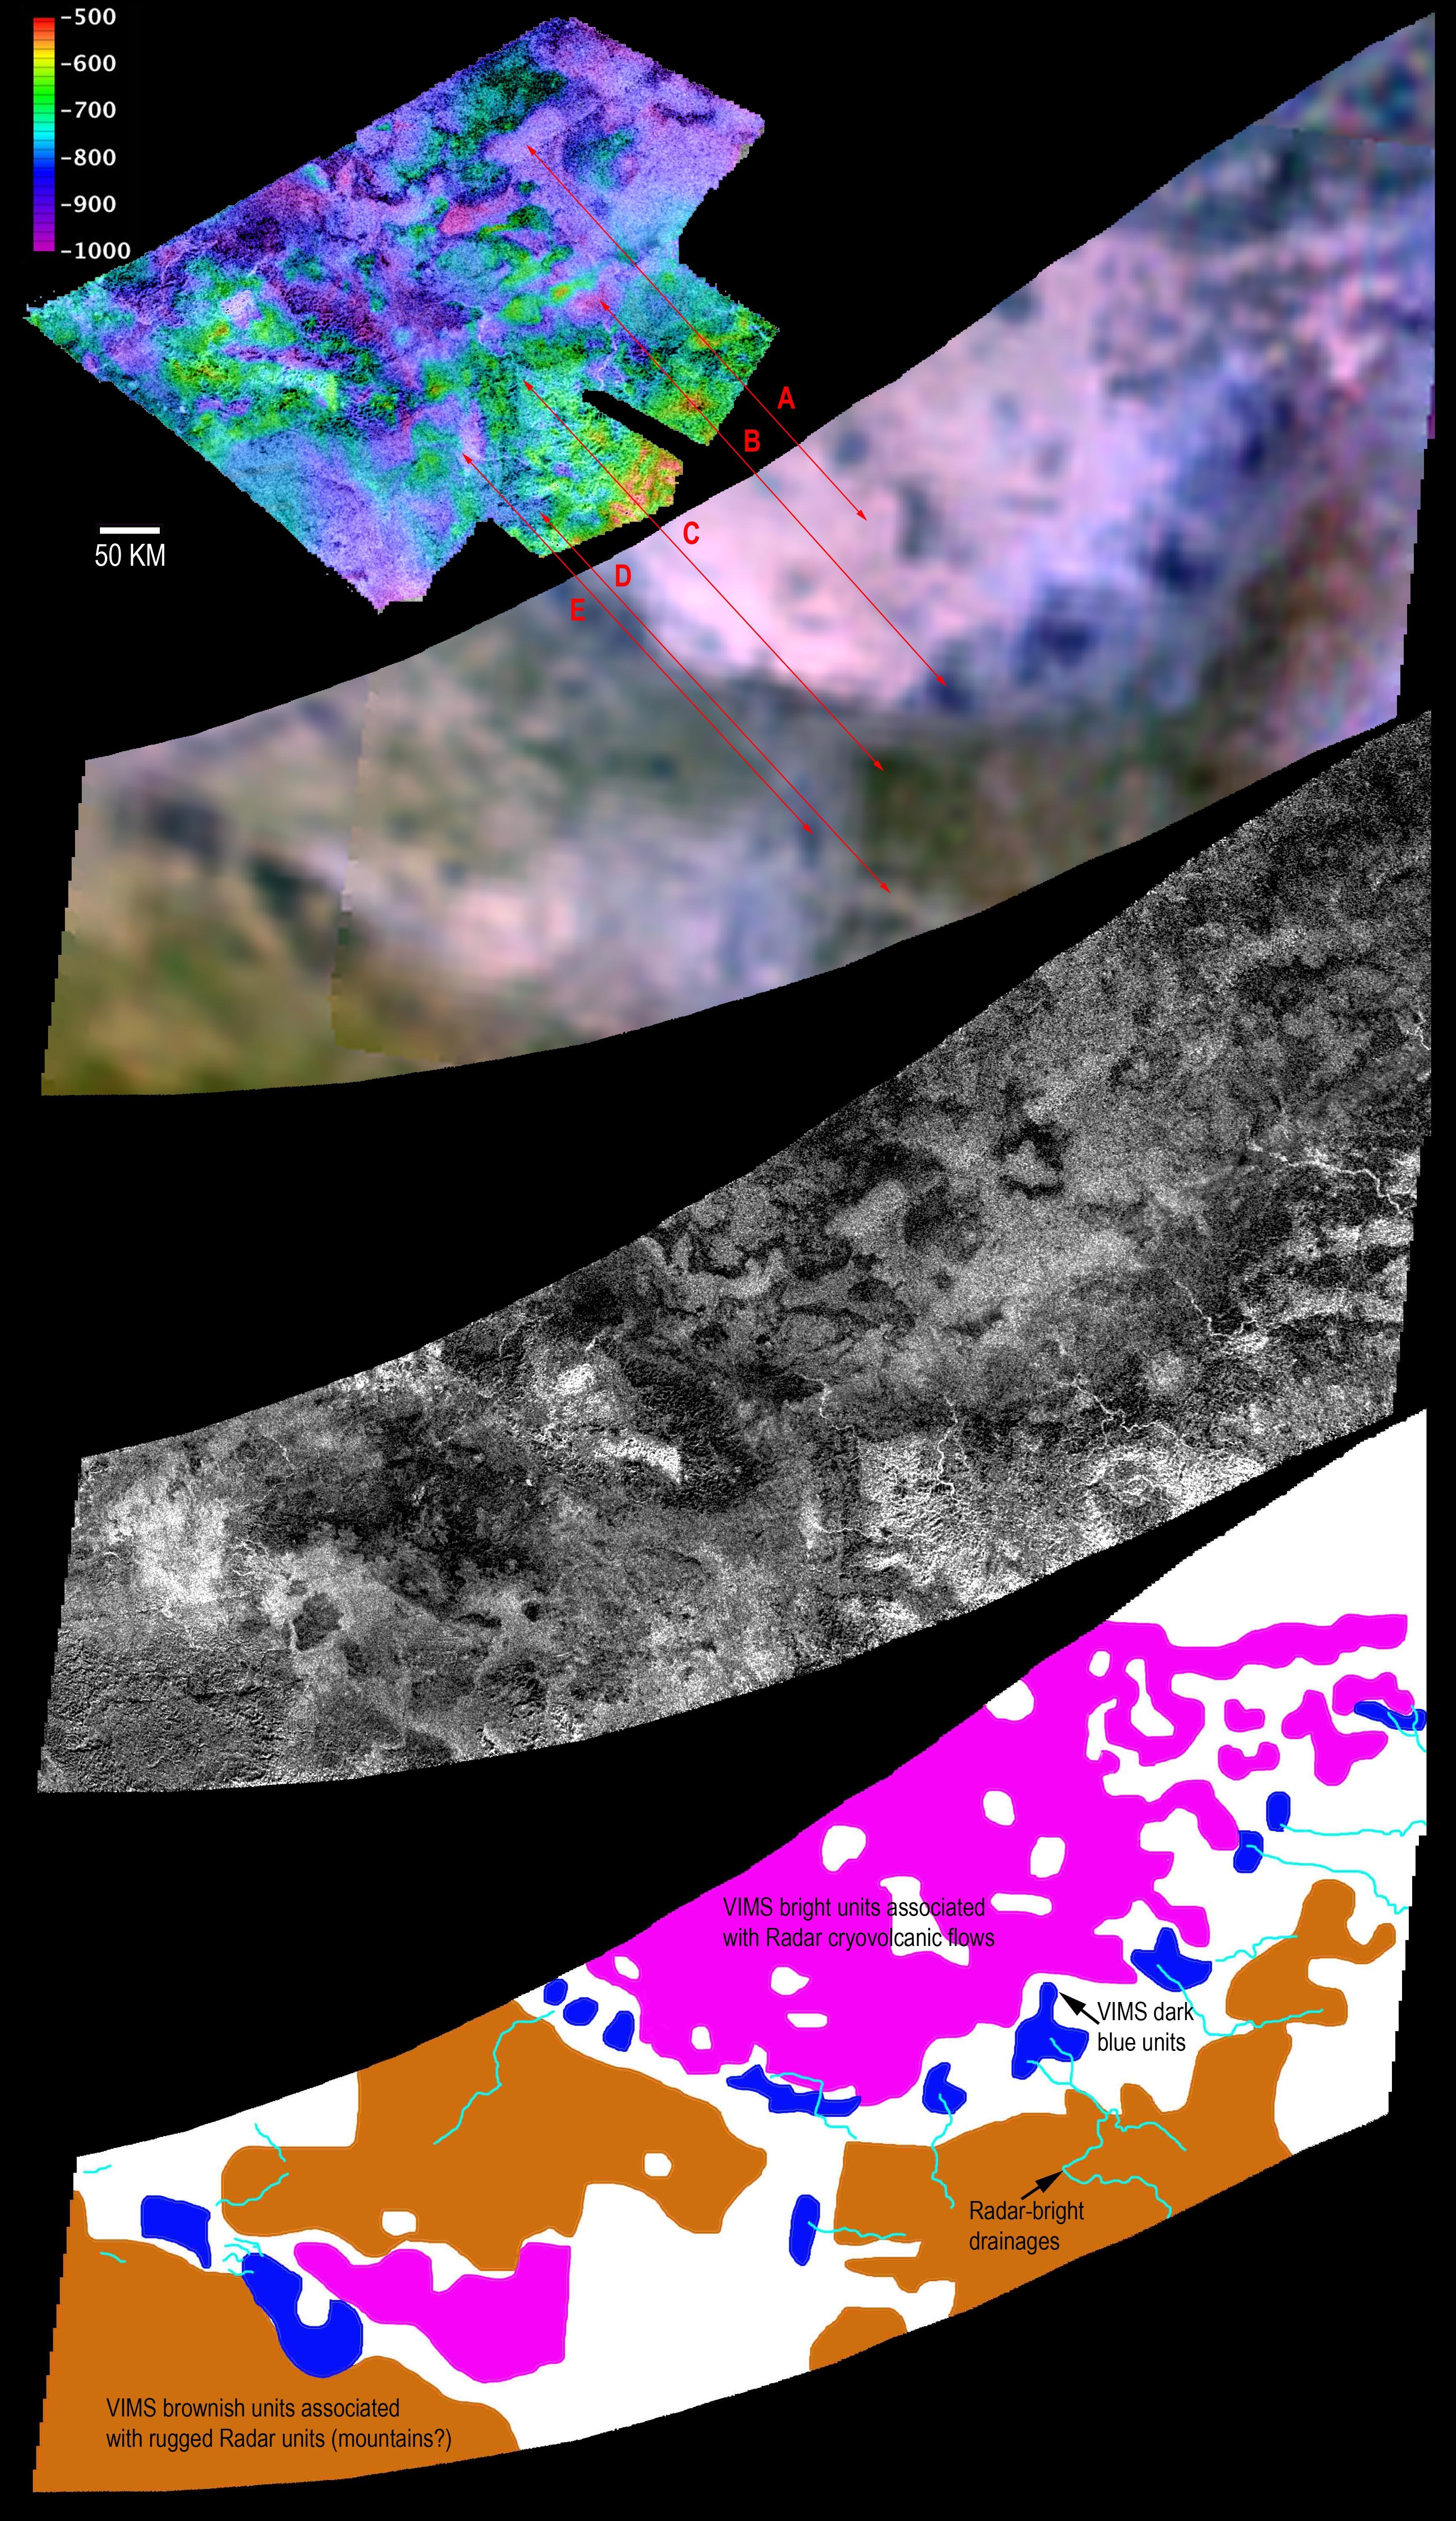 Four views of a section of Titan's surface from different science instruments.